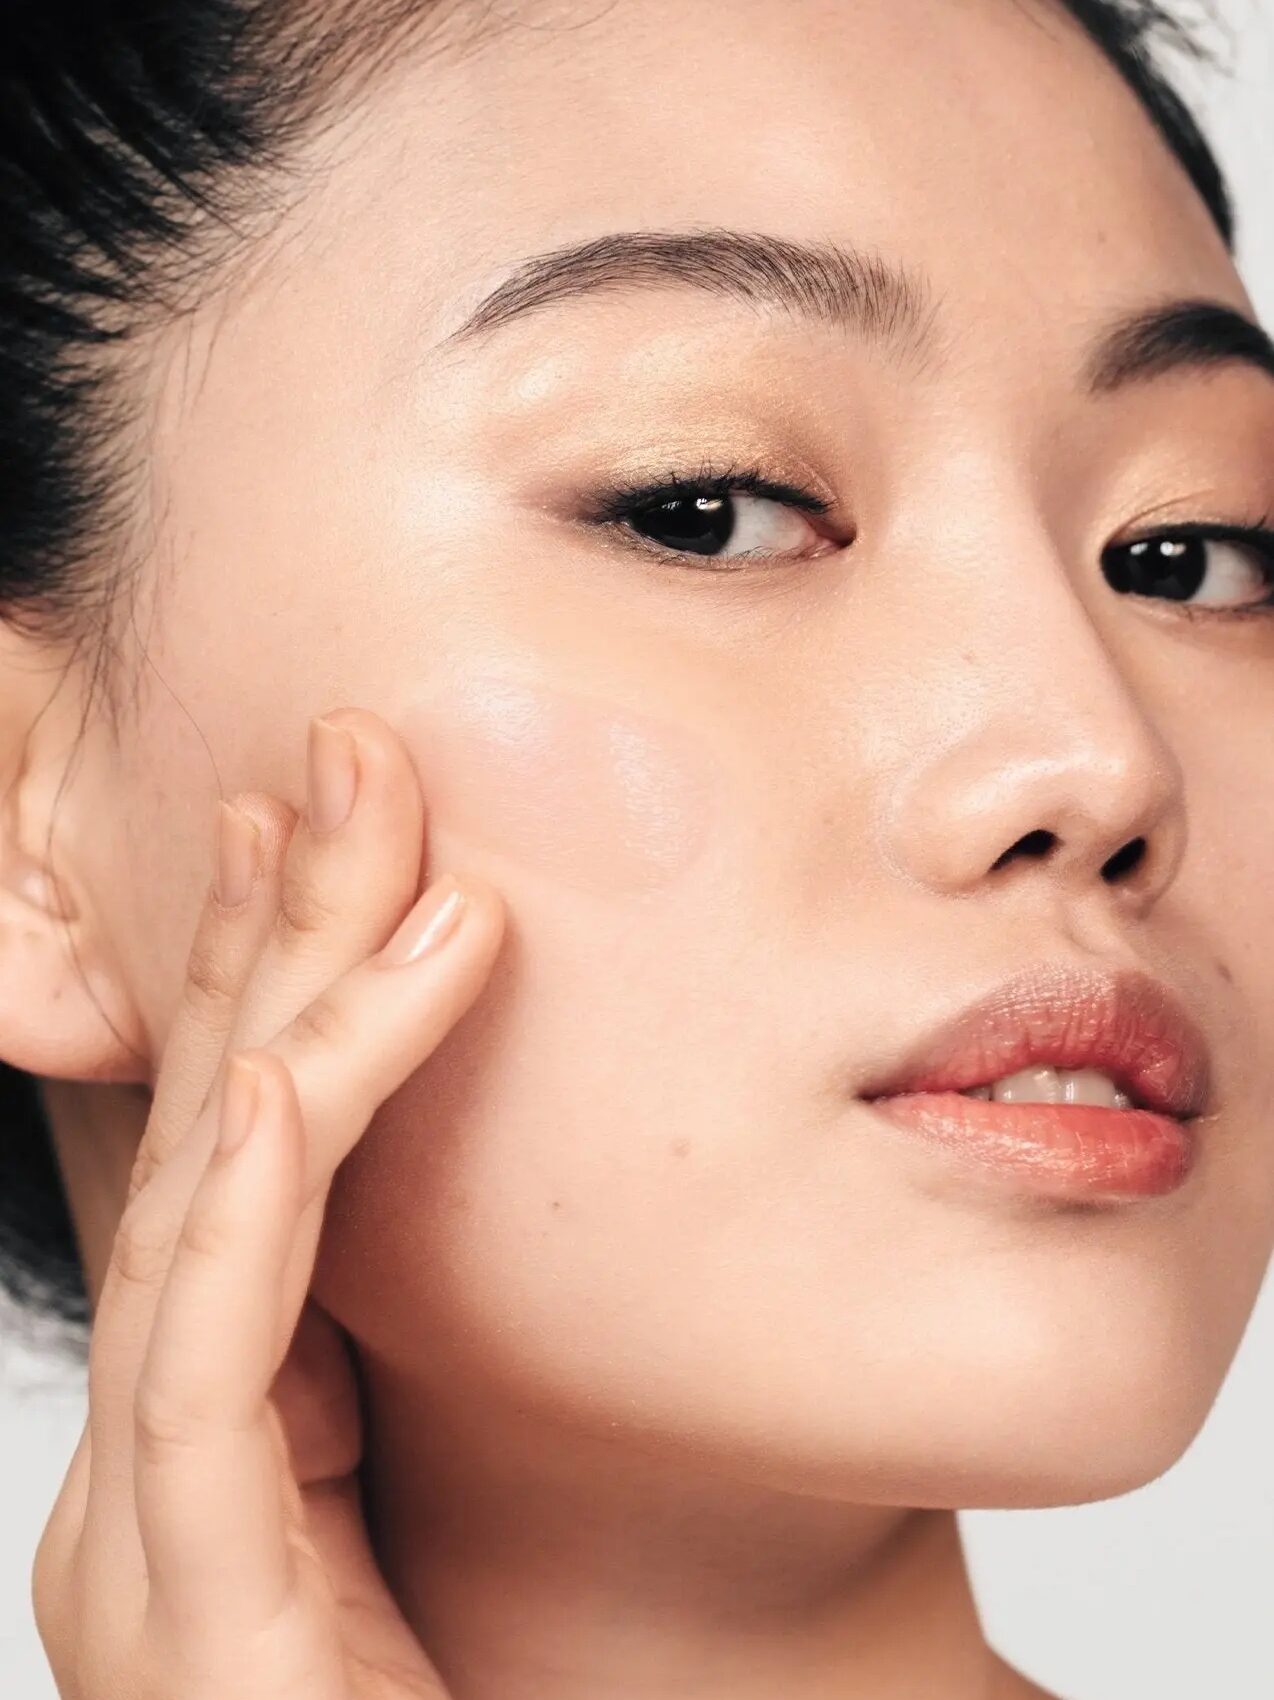 A close up of an Asian model testing the product on her cheek